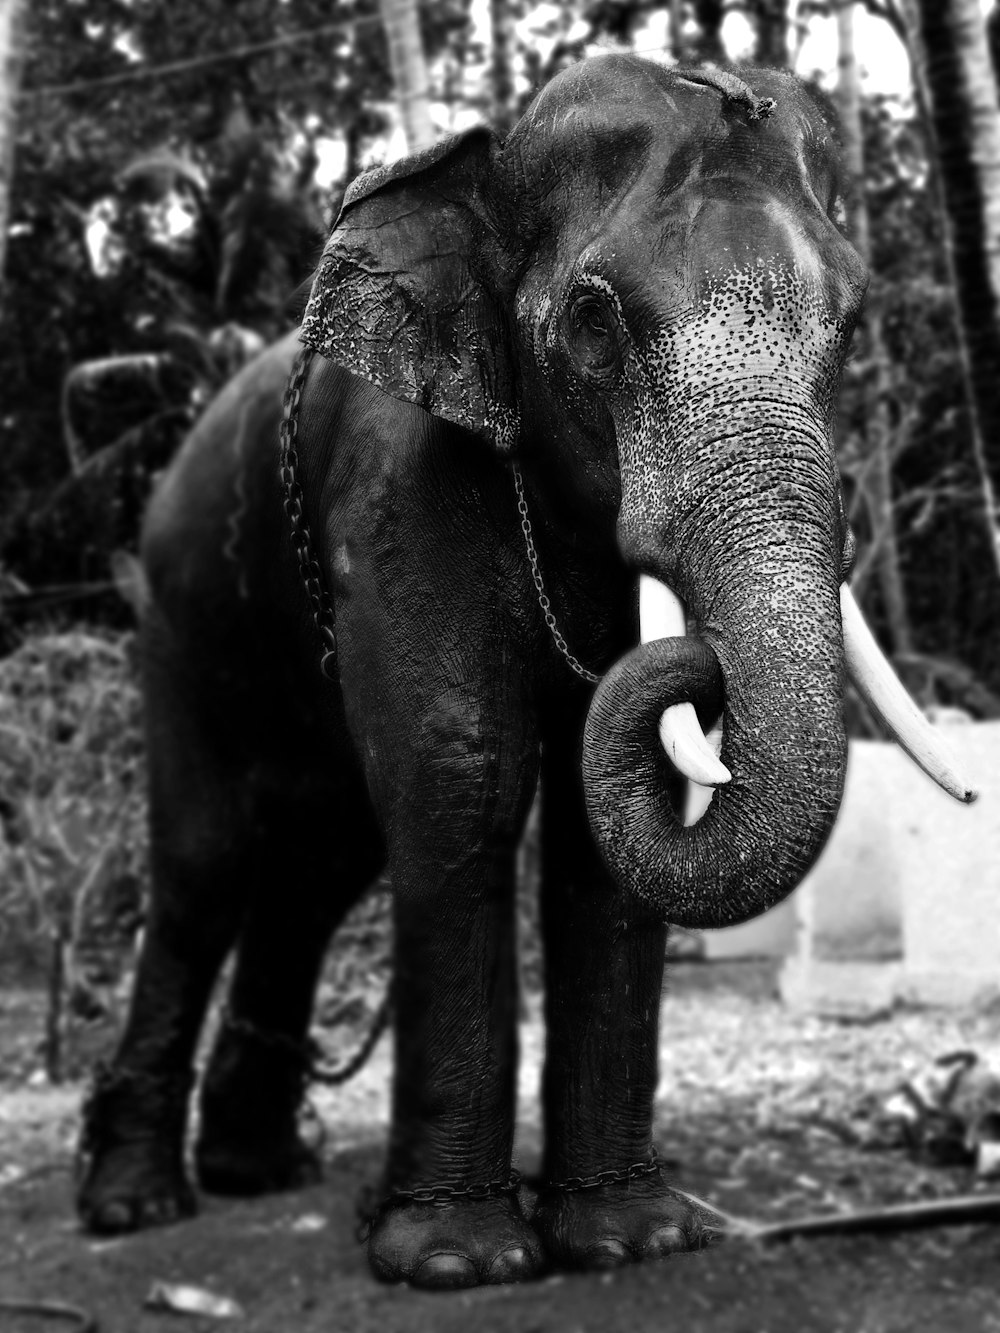 grayscale photography of an elephant